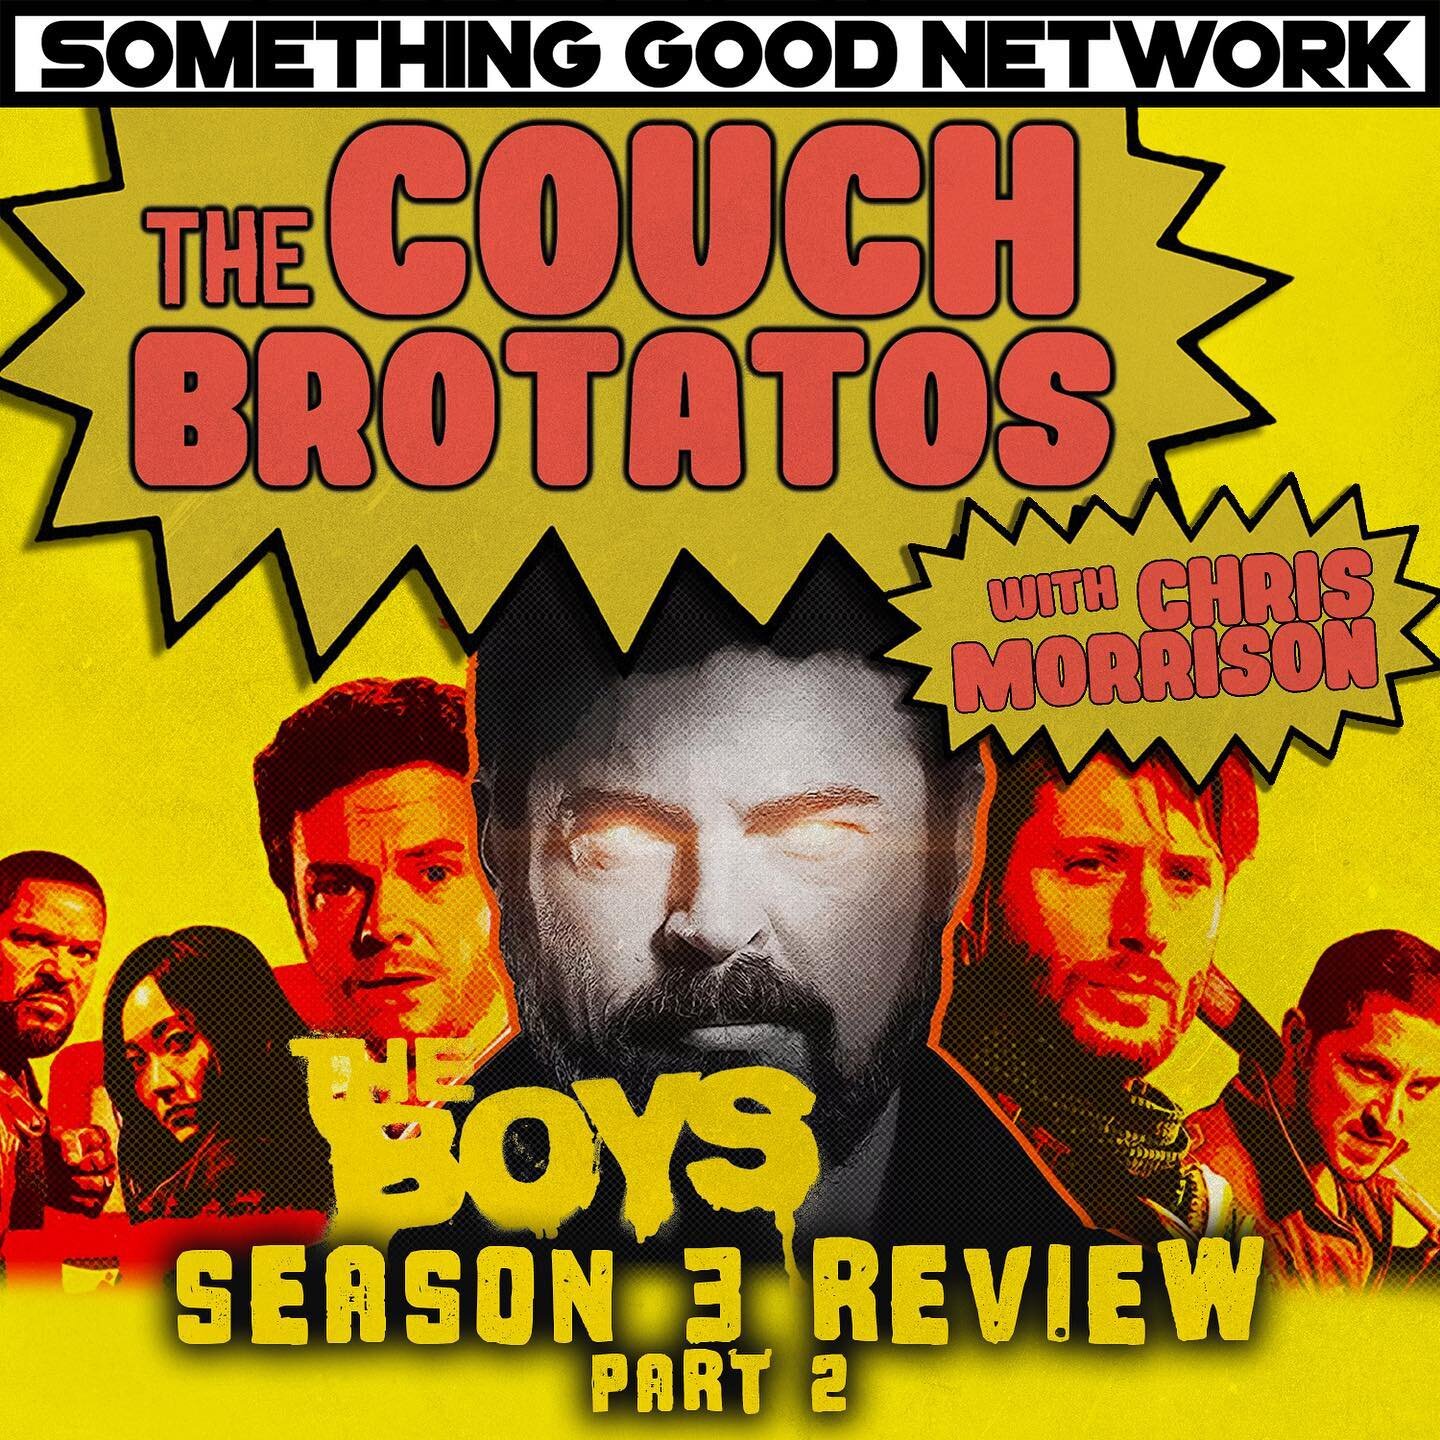 Did you catch WEDNESDAY&rsquo;S new episode of THE COUCH BROTATOS?! Check it out on your fave podcast platform! ➡️ LINK IN THE BIO 💥
⚡️⚡️⚡️
This is PART 2 of our discussion of THE BOYS Season 3 on Amazon! If you didn't catch last week's episode, we 